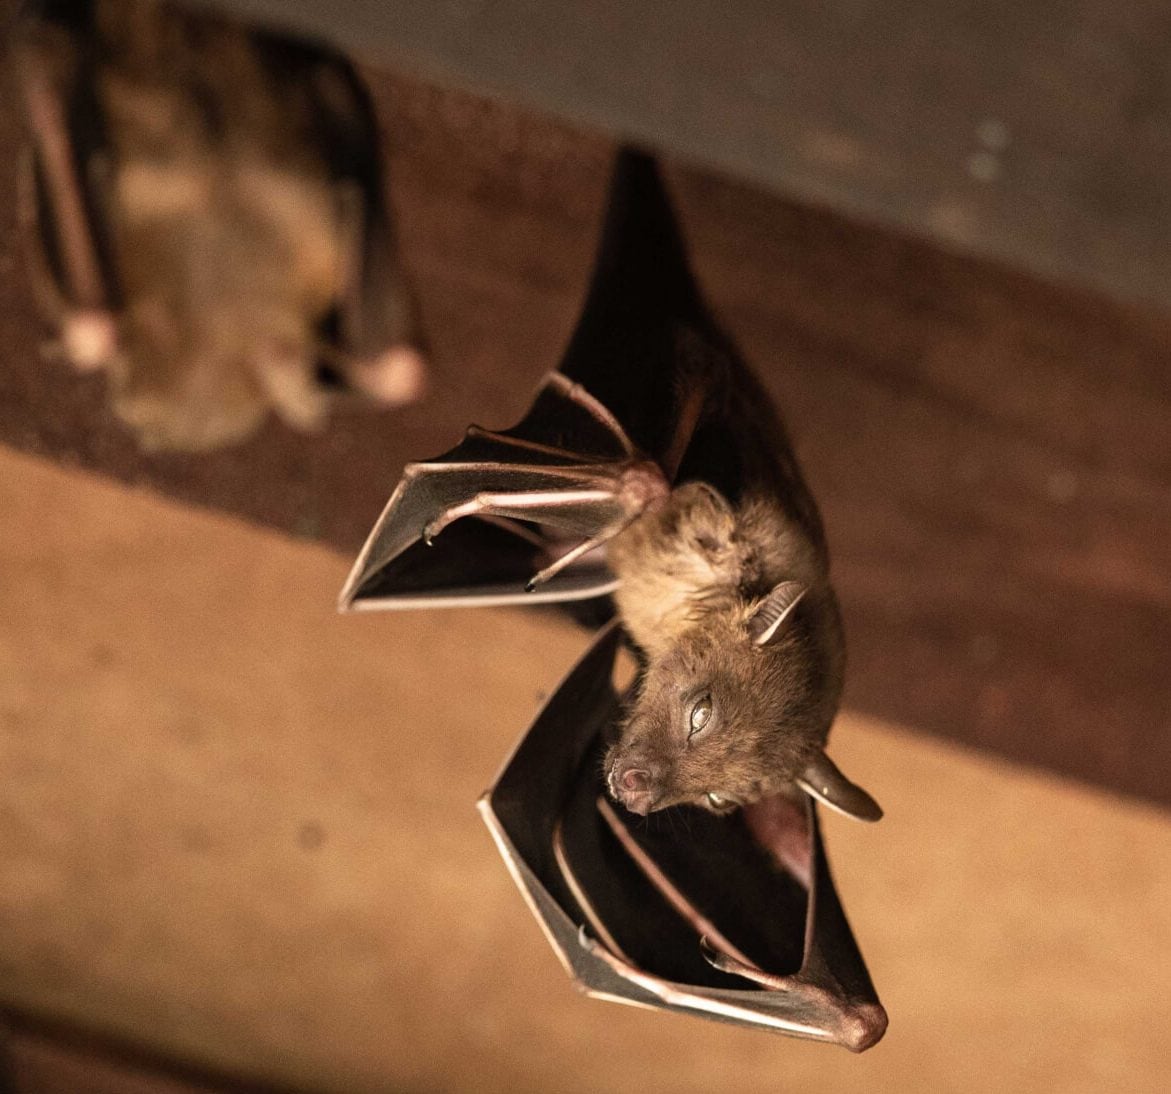 Expert bat removal services for a safe and humane solution in Syracuse